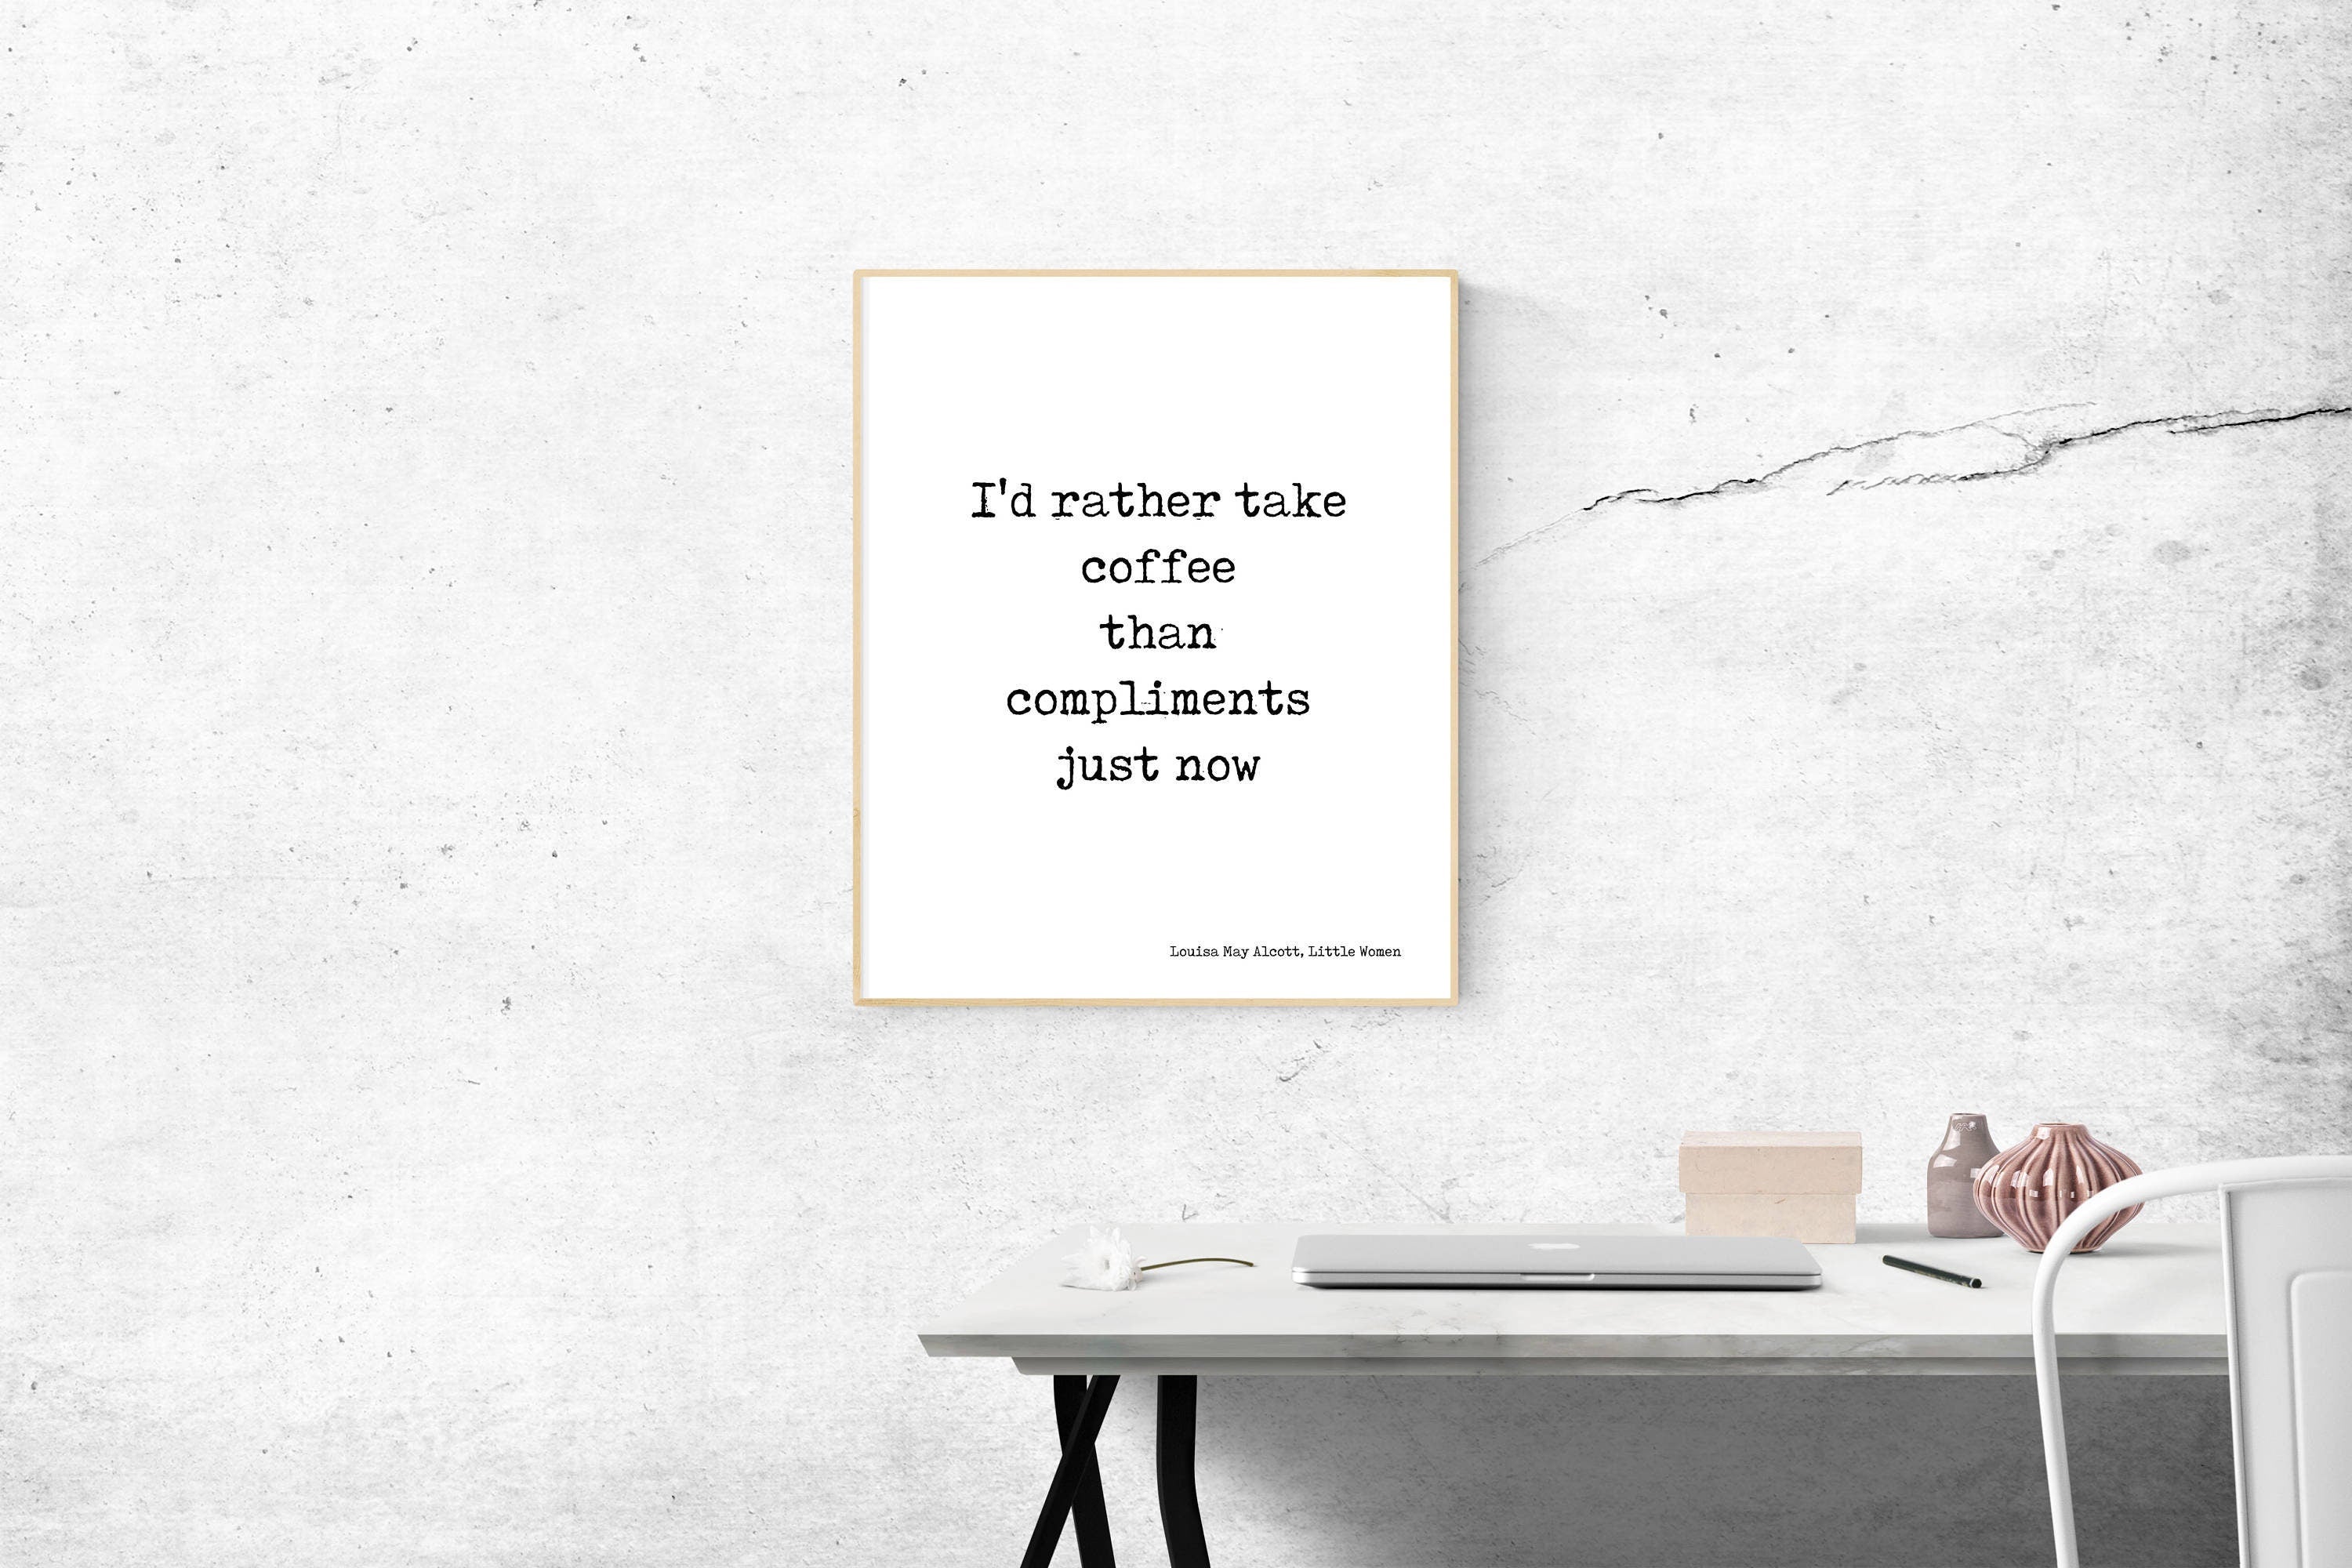 Little Women COFFEE Quote Wall Art Print, Coffee Decor for Kitchen LM Alcott Print